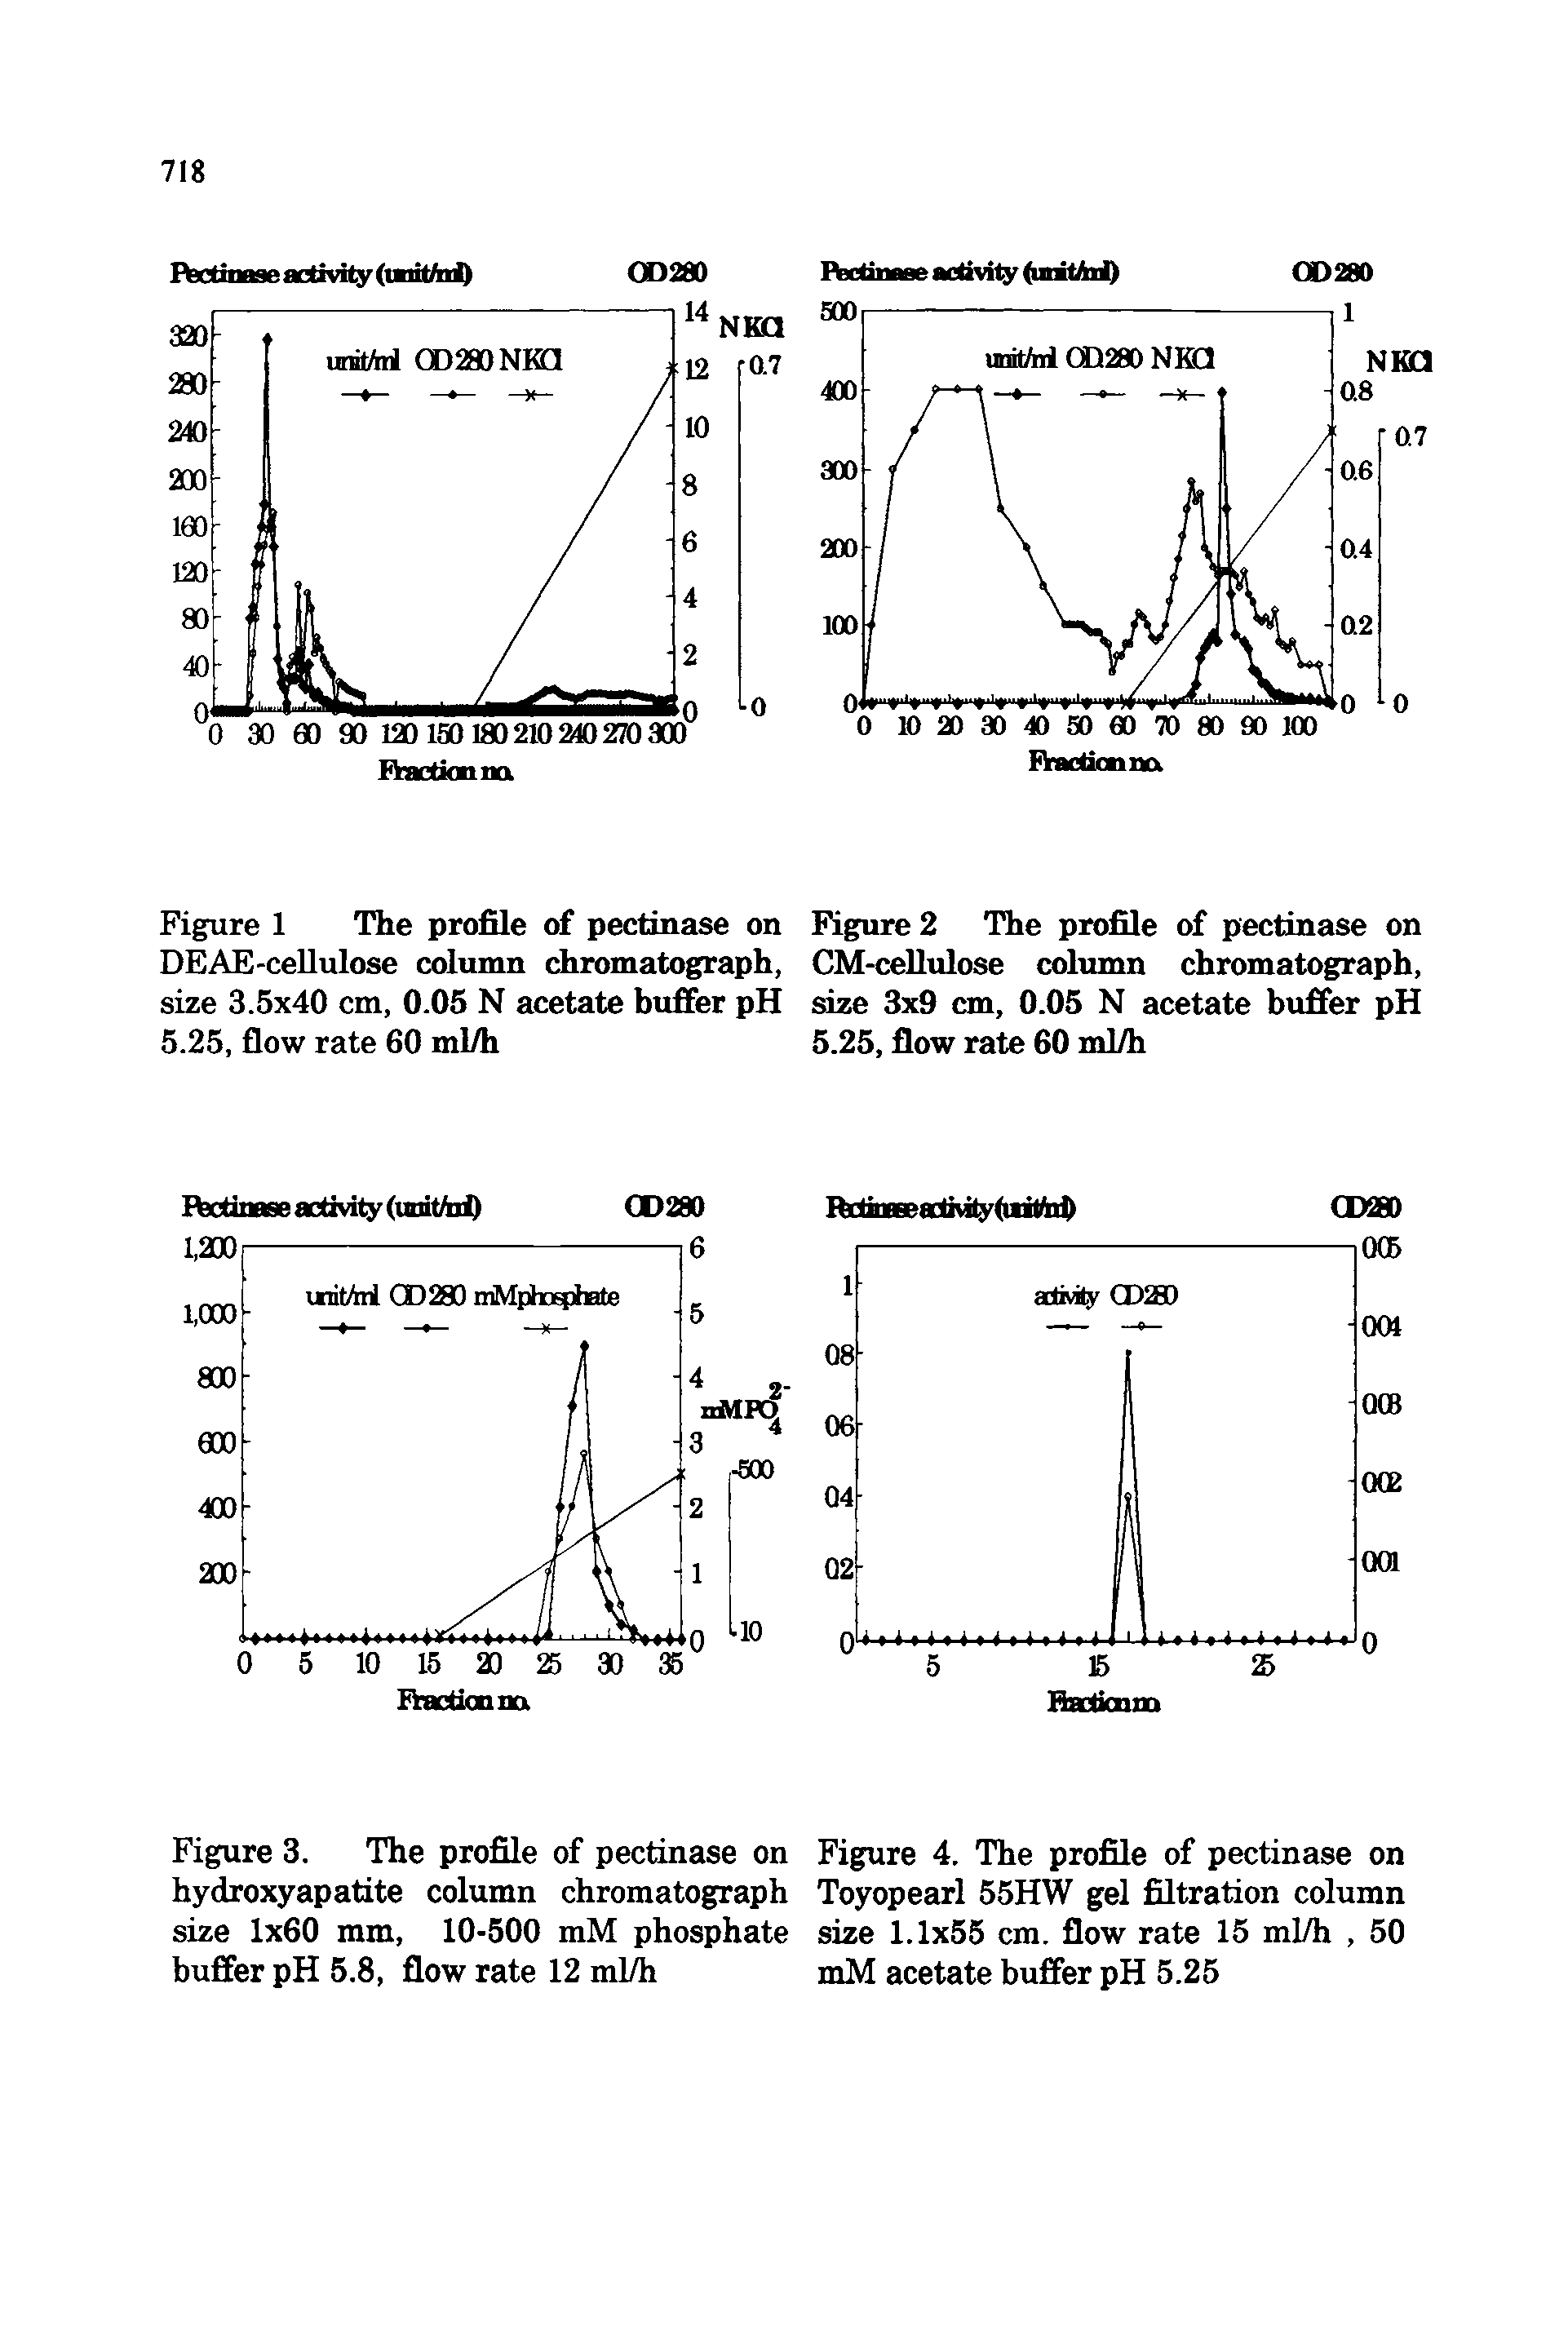 Figure 3. The profile of pectinase on Figure 4. The profile of pectinase on hydroxyapatite column chromatograph Toyopearl 55HW gel filtration column size 1x60 mm, 10-500 mM phosphate size 1.1x55 cm. flow rate 15 ml/h, 50 buffer pH 5.8, flow rate 12 ml/h mM acetate buffer pH 5.25...